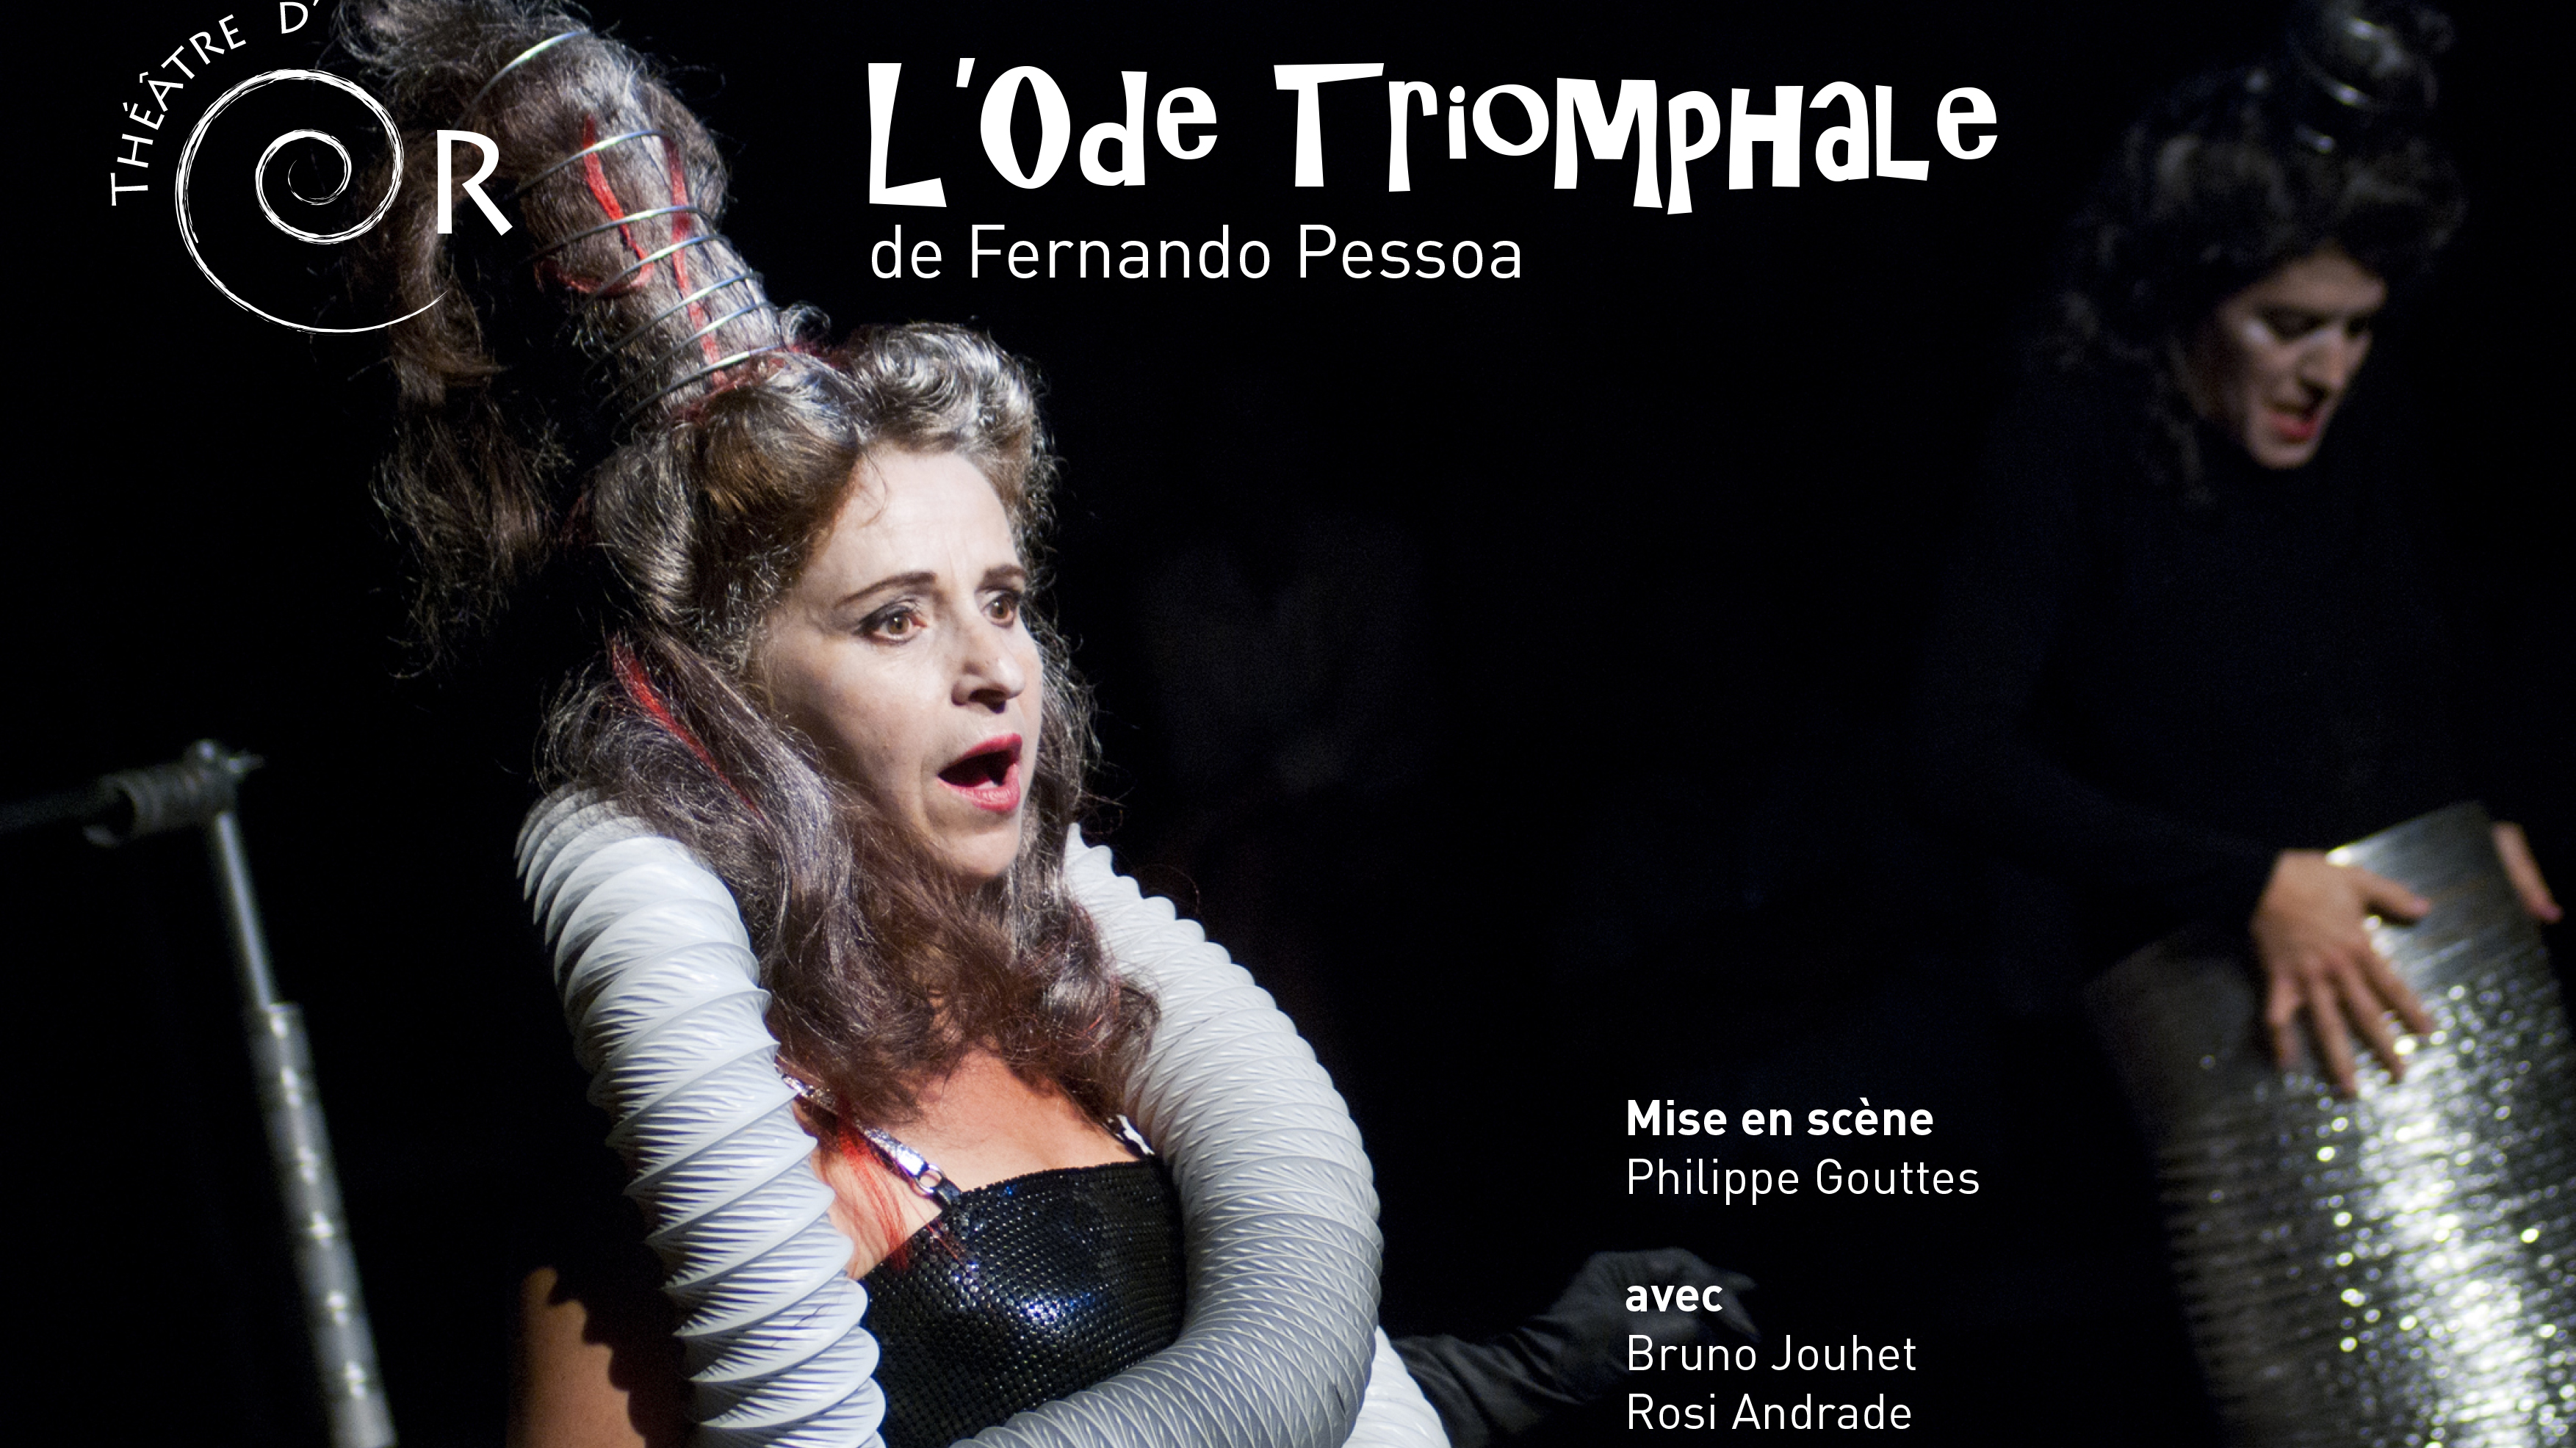 theatre d'or - Ode triomphale